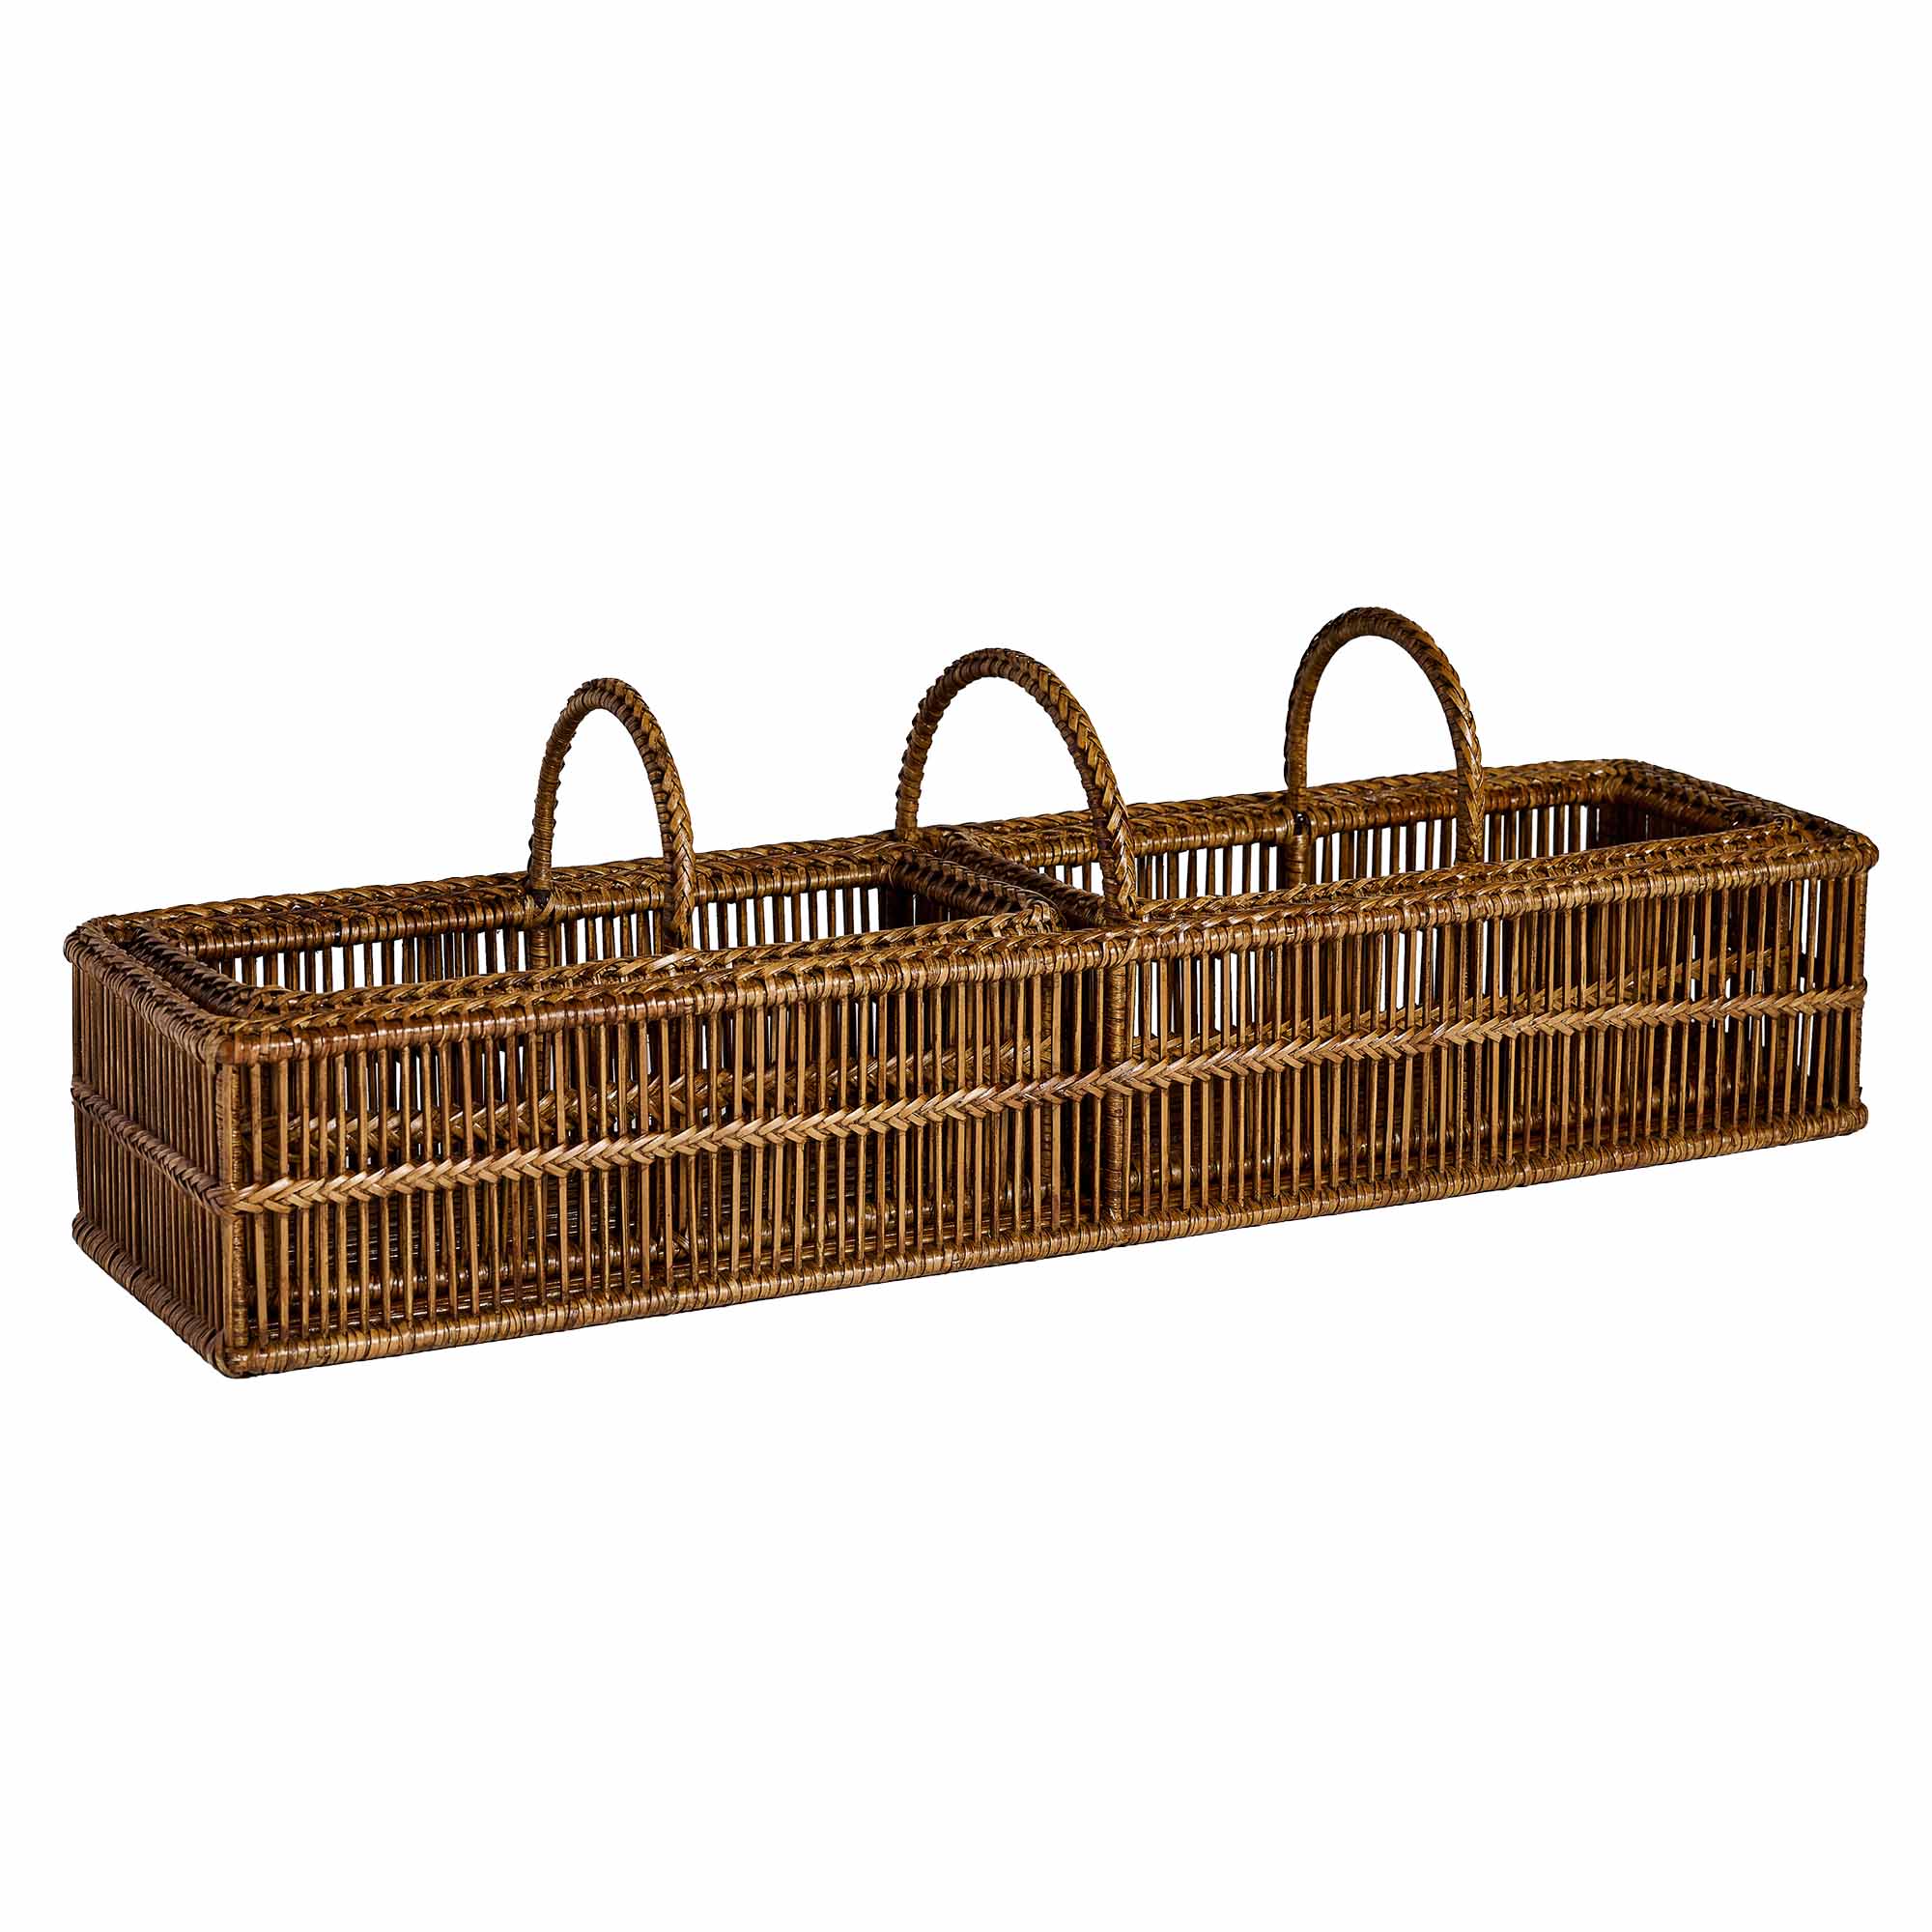 Set 3 Rain containers in natural rattan, dim. 60x16x19cm and 28x12 x17cm